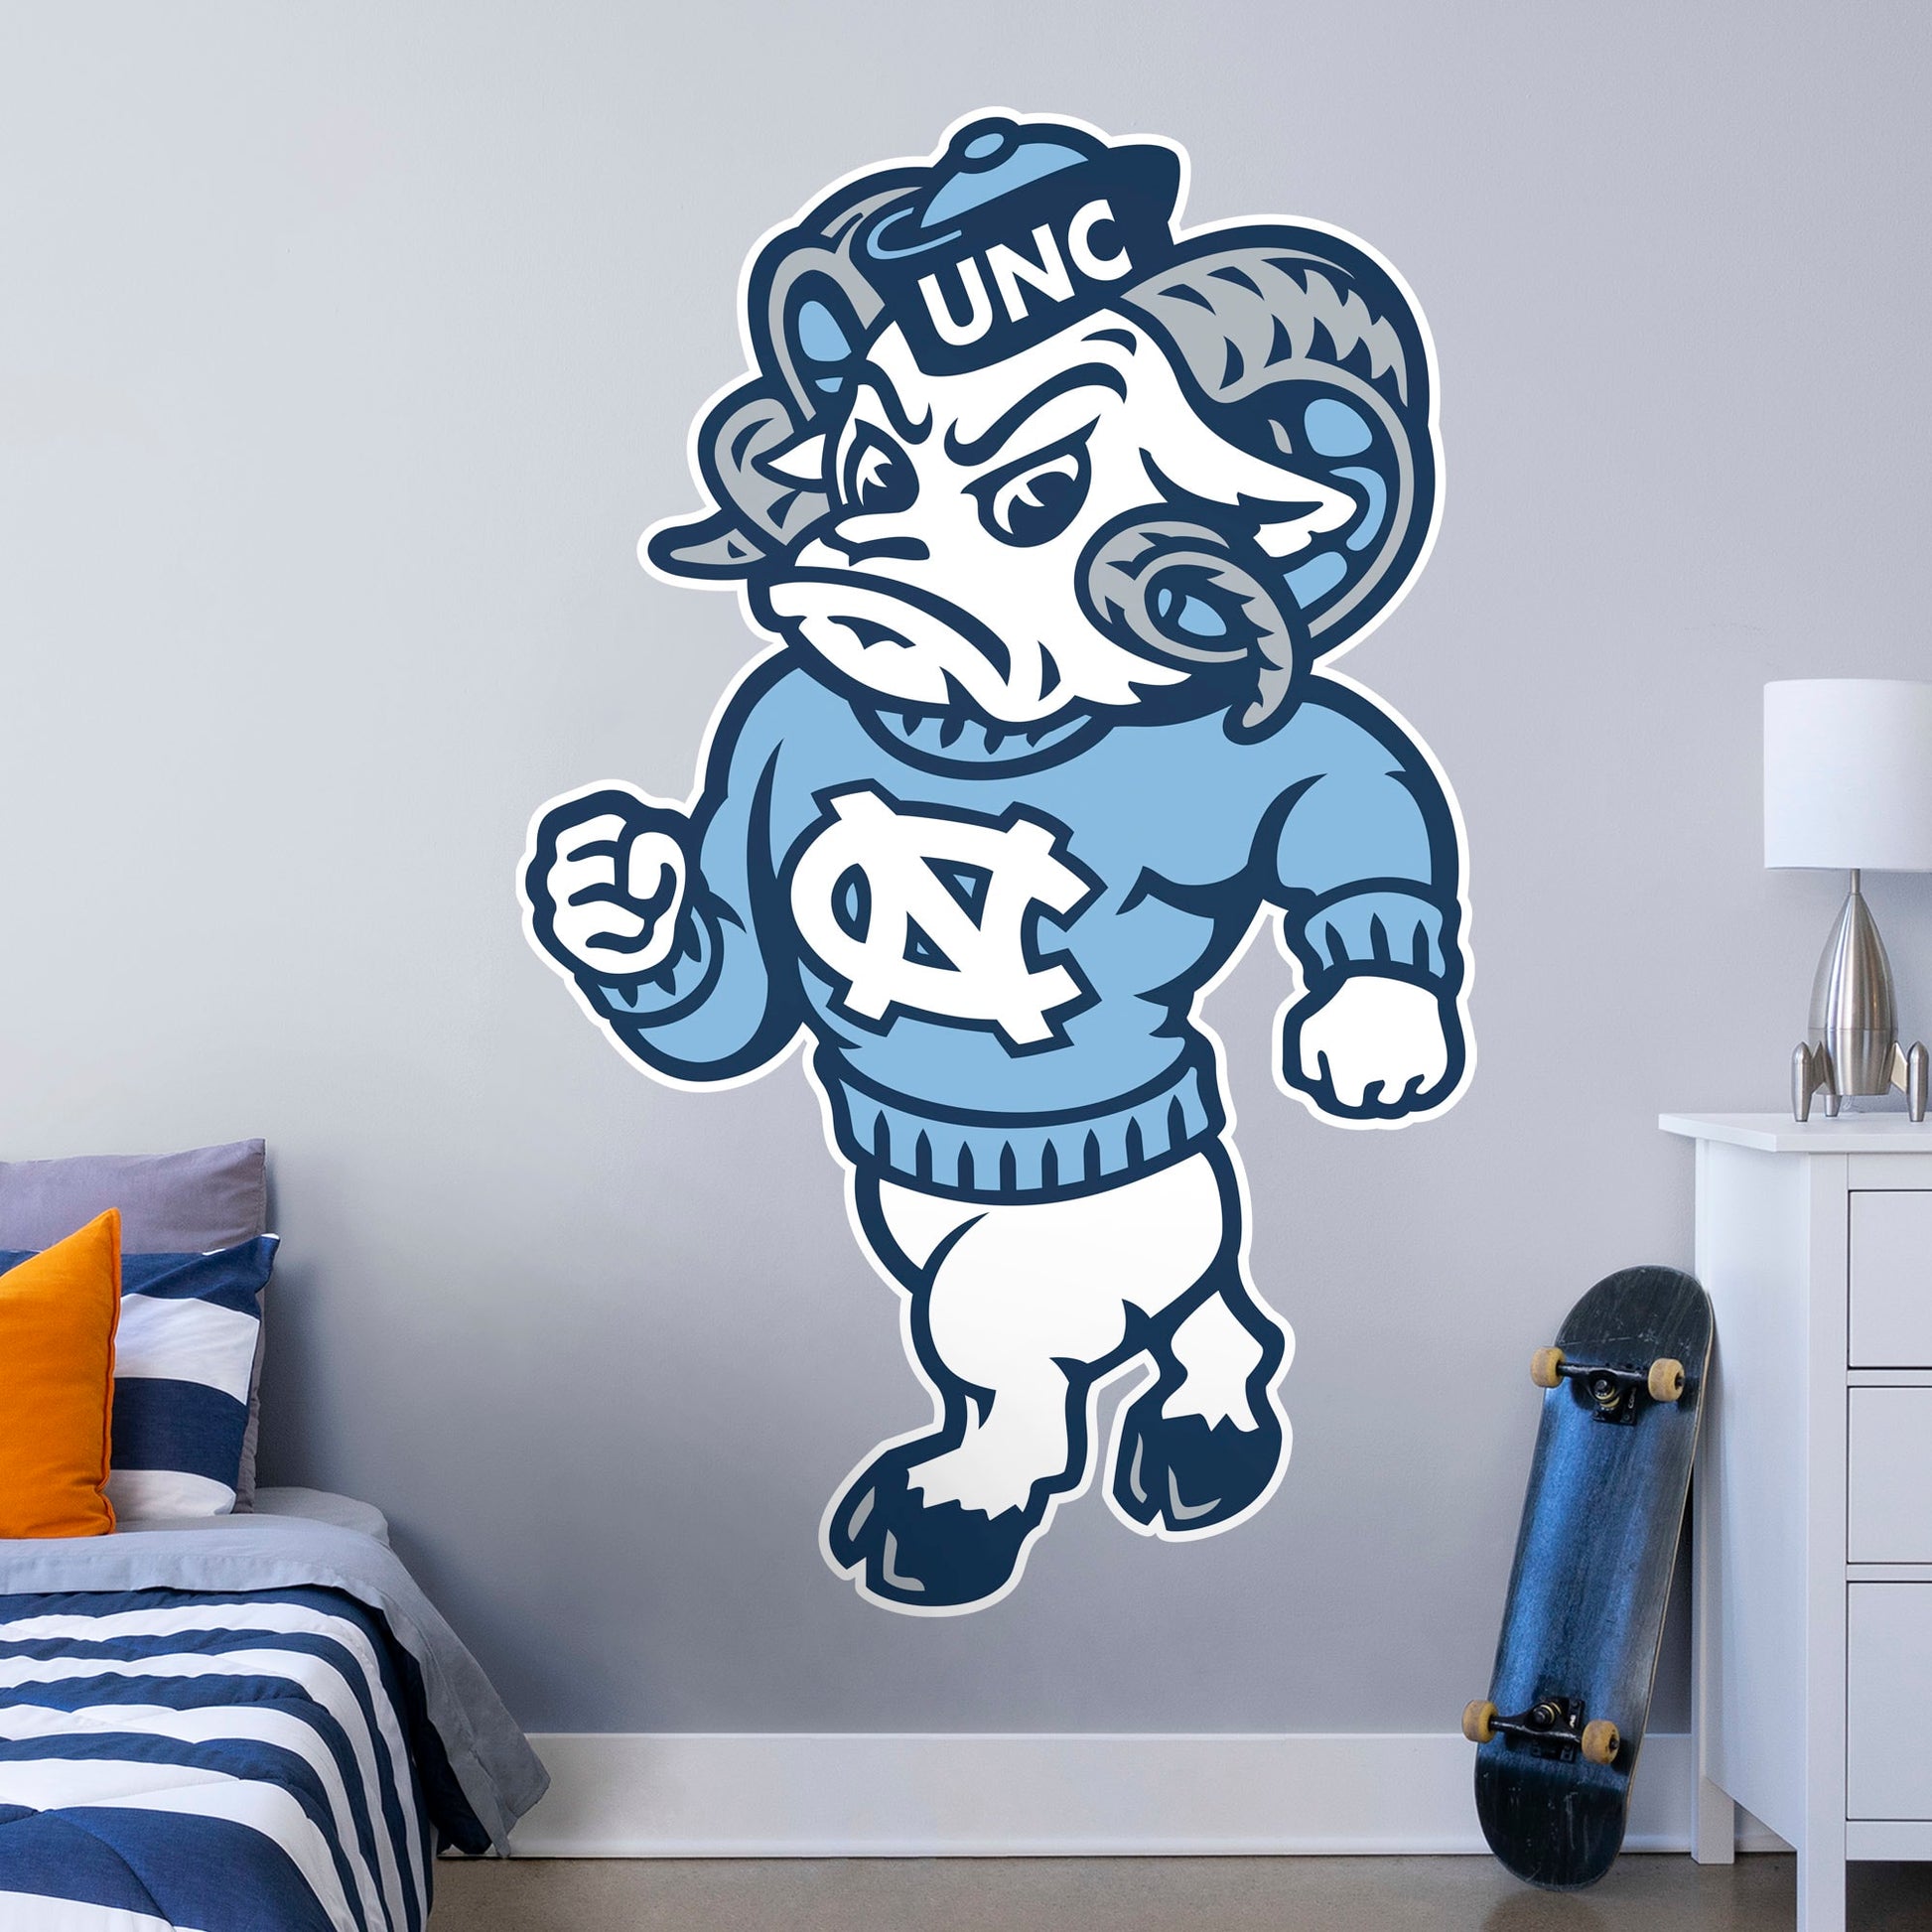 Life-Size Mascot + 2 Decals (50"W x 78"H)